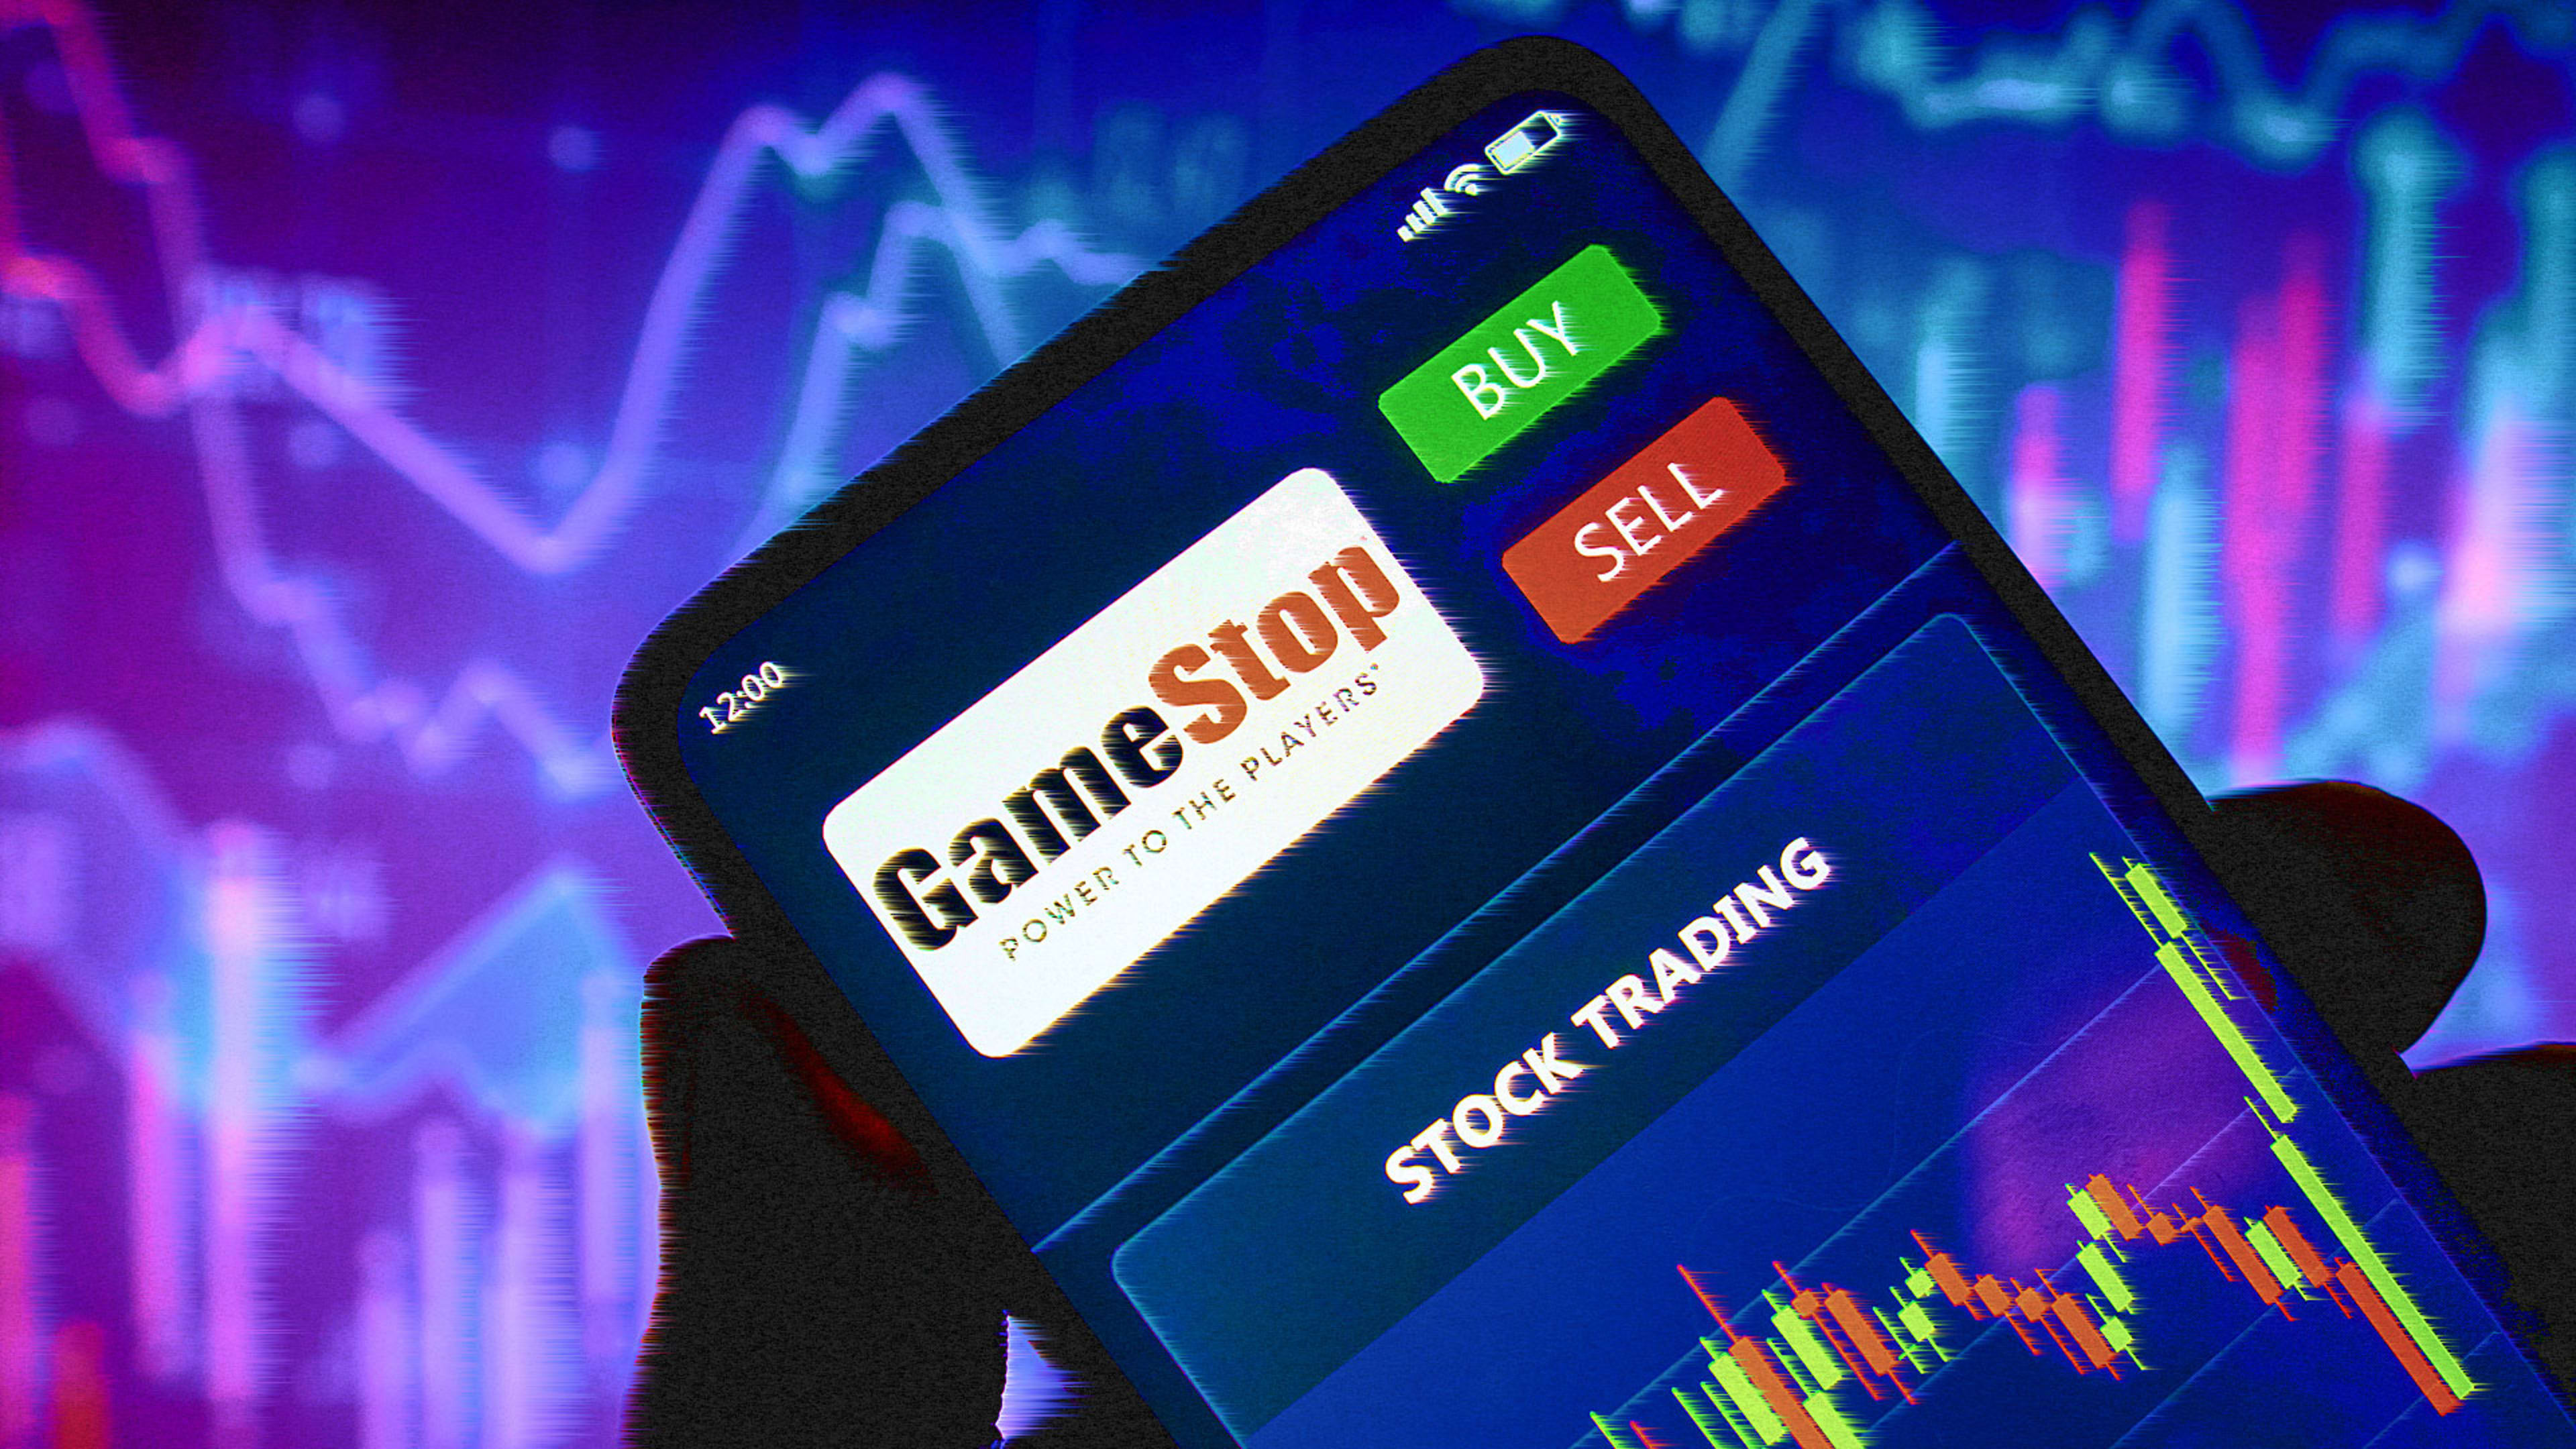 GameStop stock price: GME shares spike nearly 10% after FTX crypto partnership announced